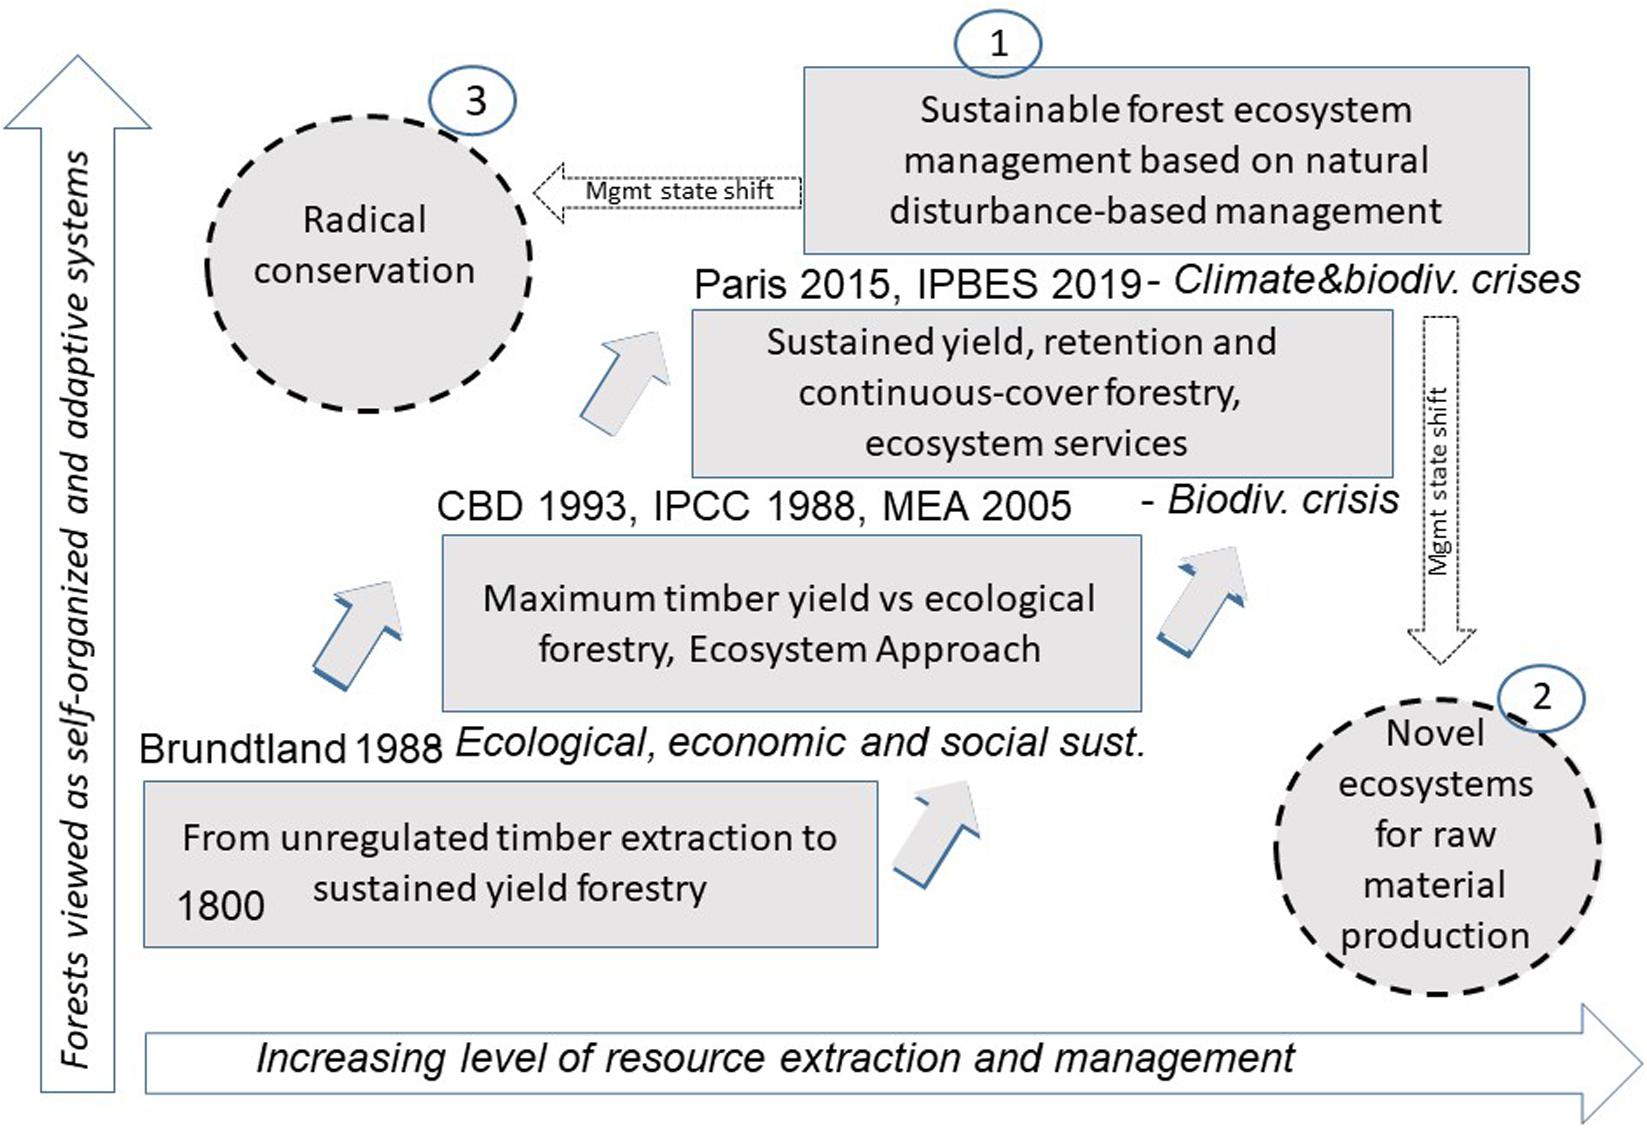 PDF) Intention of preserving forest remnants among landowners in the  Atlantic Forest: The role of the ecological context via ecosystem services